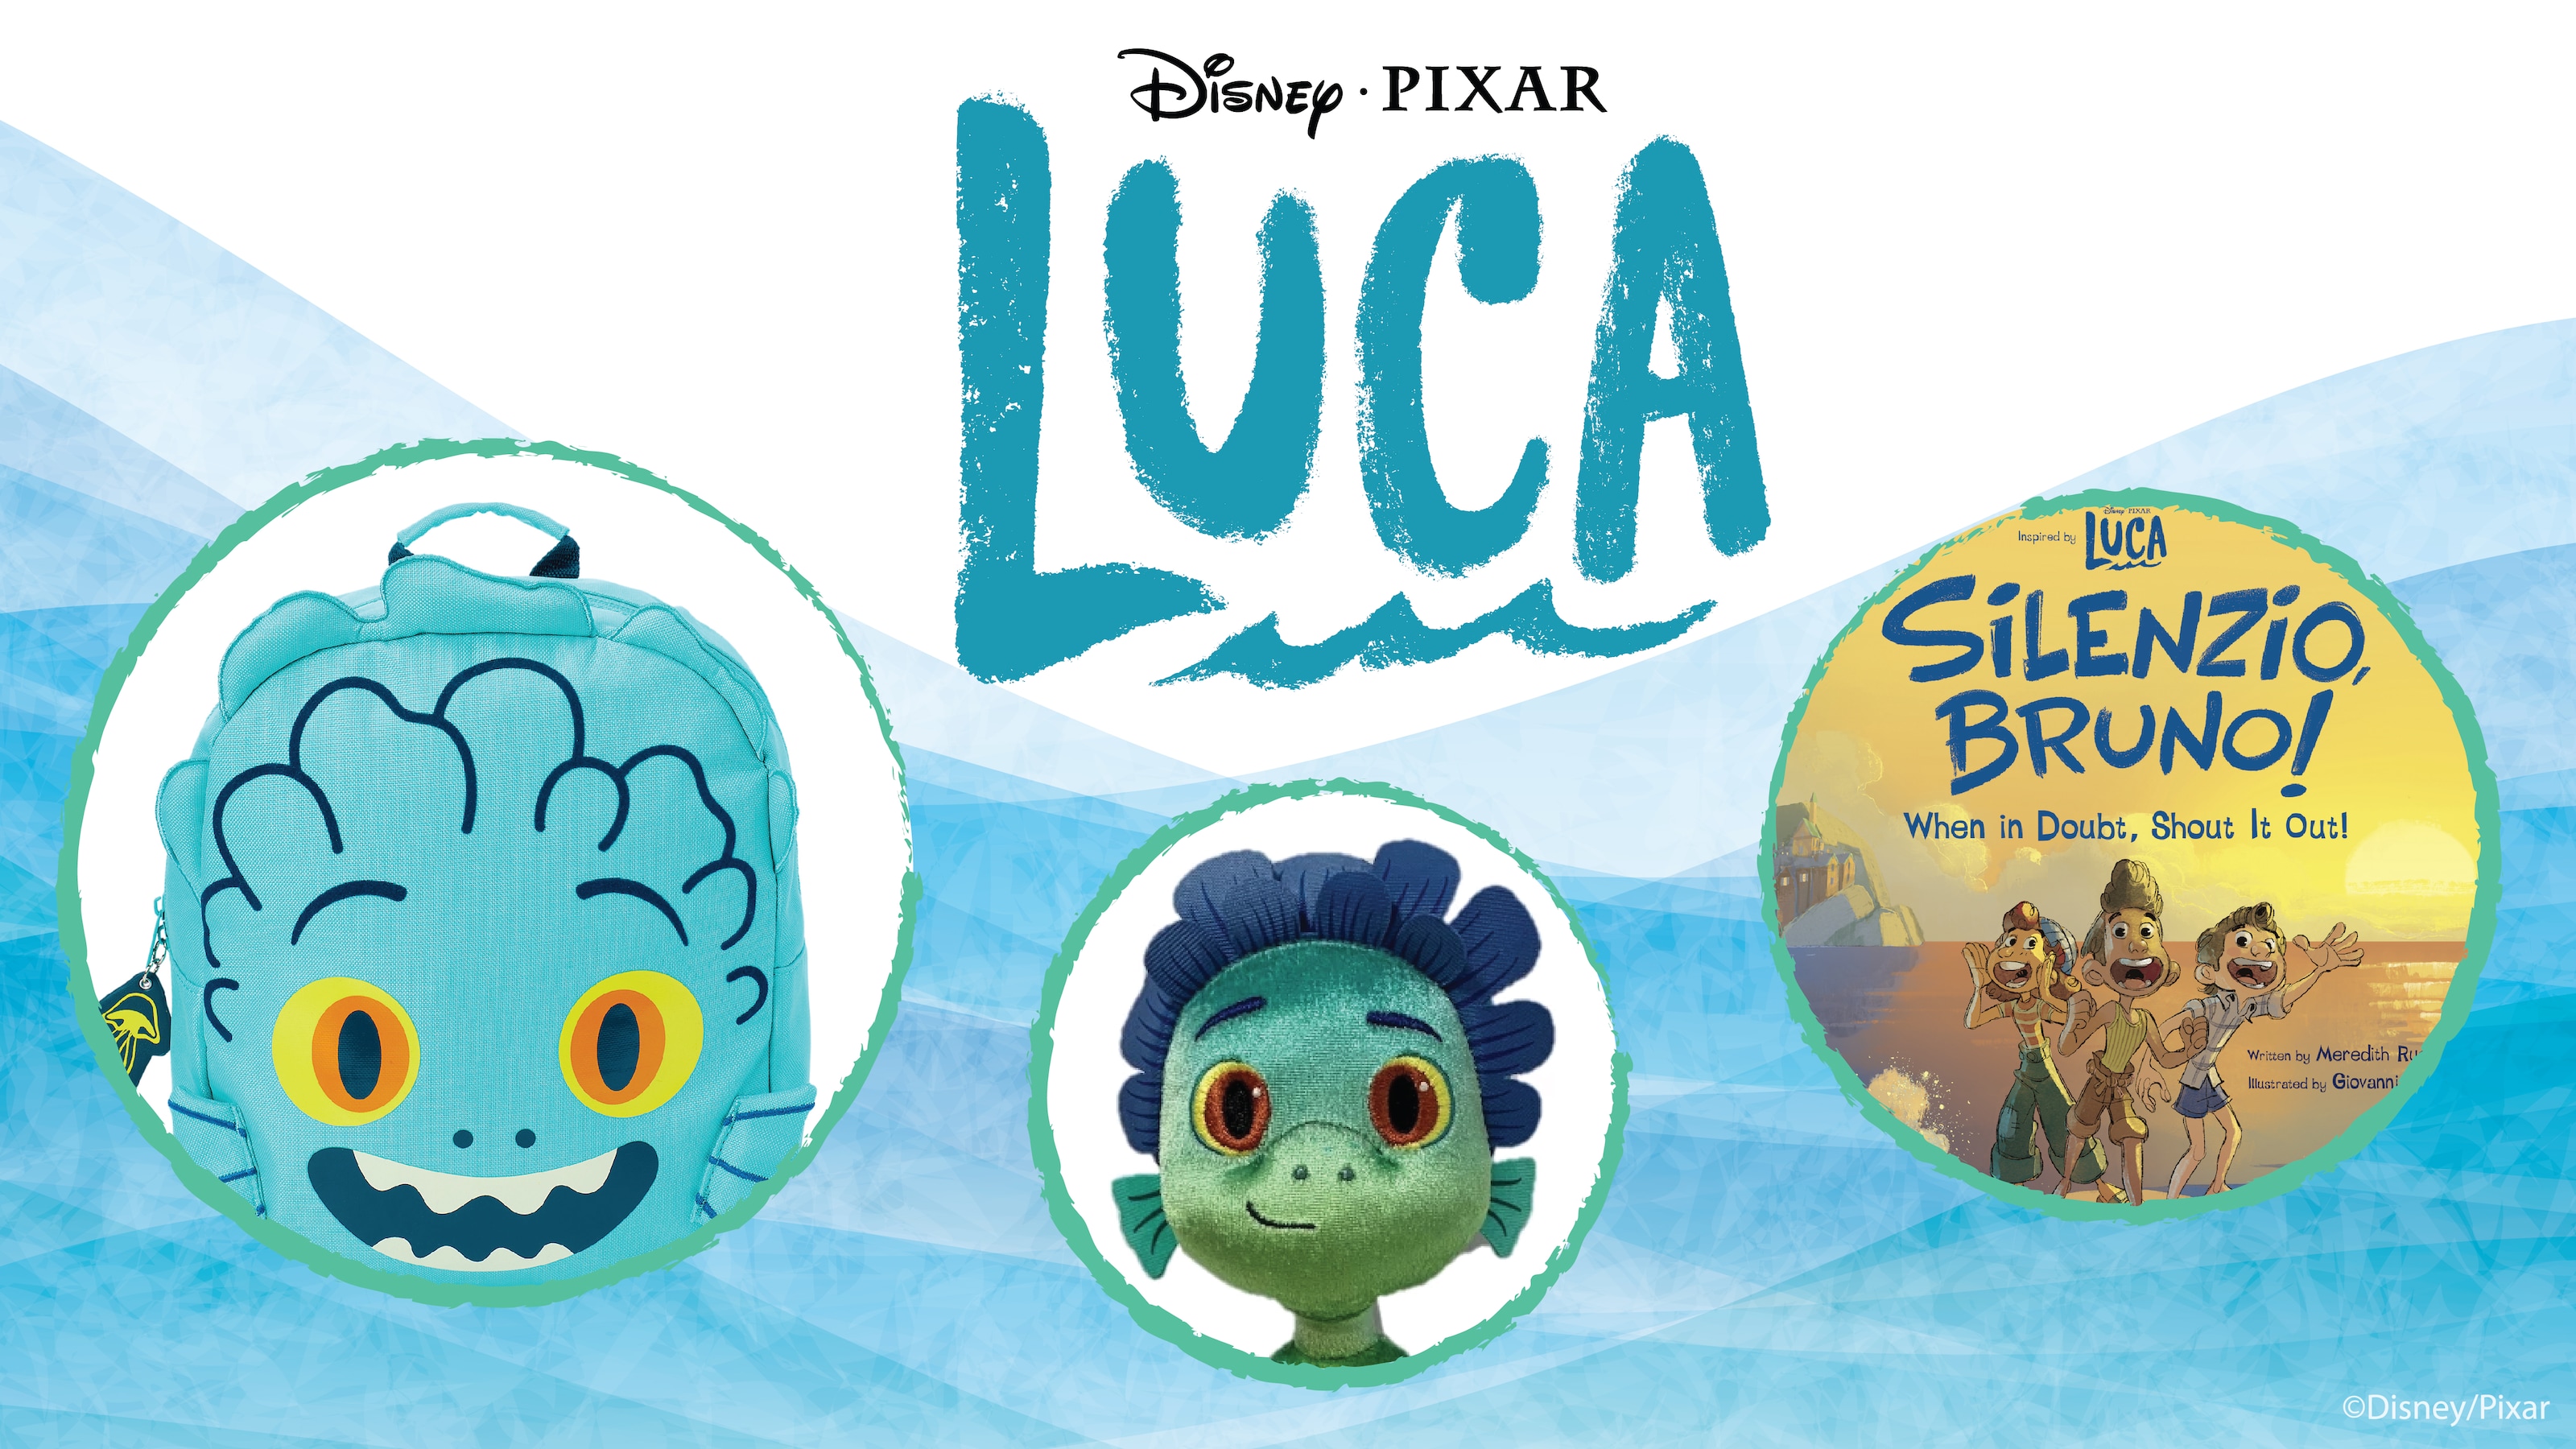 A first look at Funko Pops from Disney Pixar's latest film, Luca. 